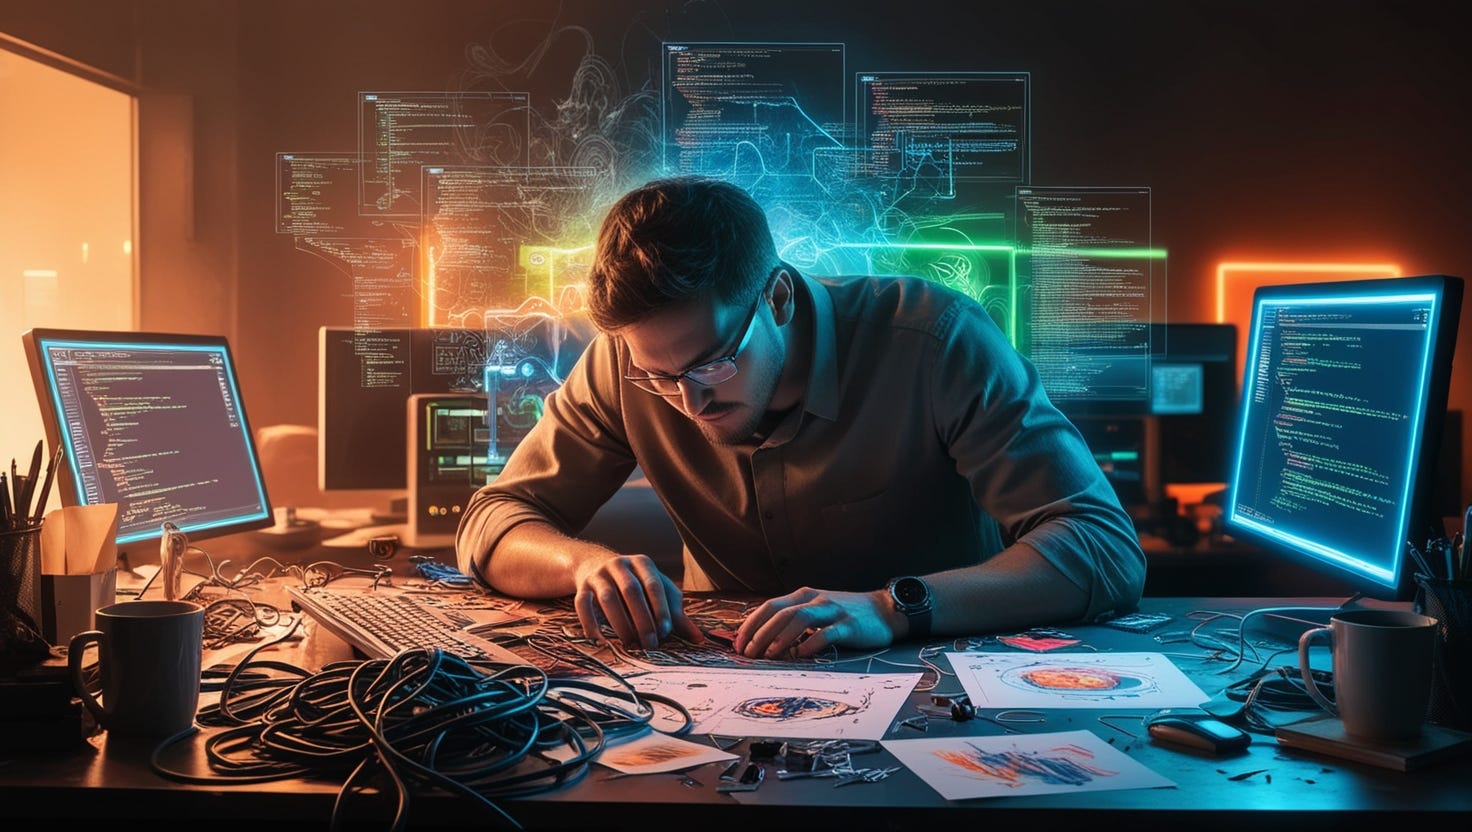 A programmer deeply focused on integrating various components of a project, surrounded by a mix of digital code and creative sketches.